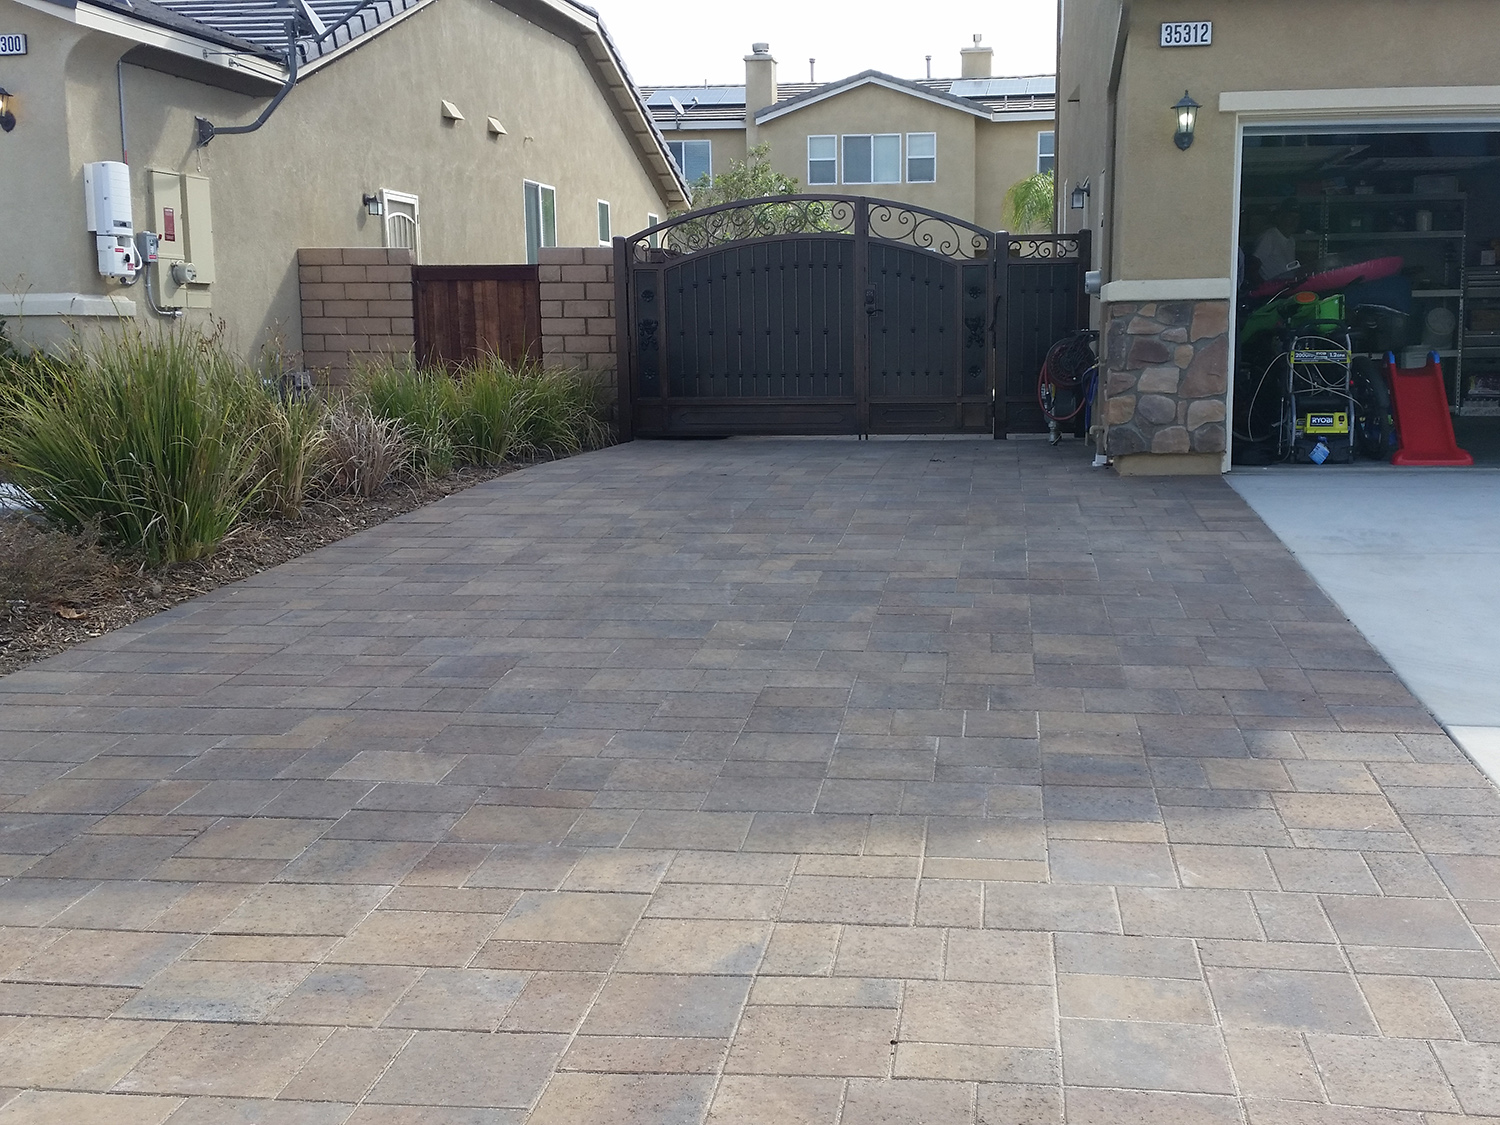 RV access driveway extension made of pavers